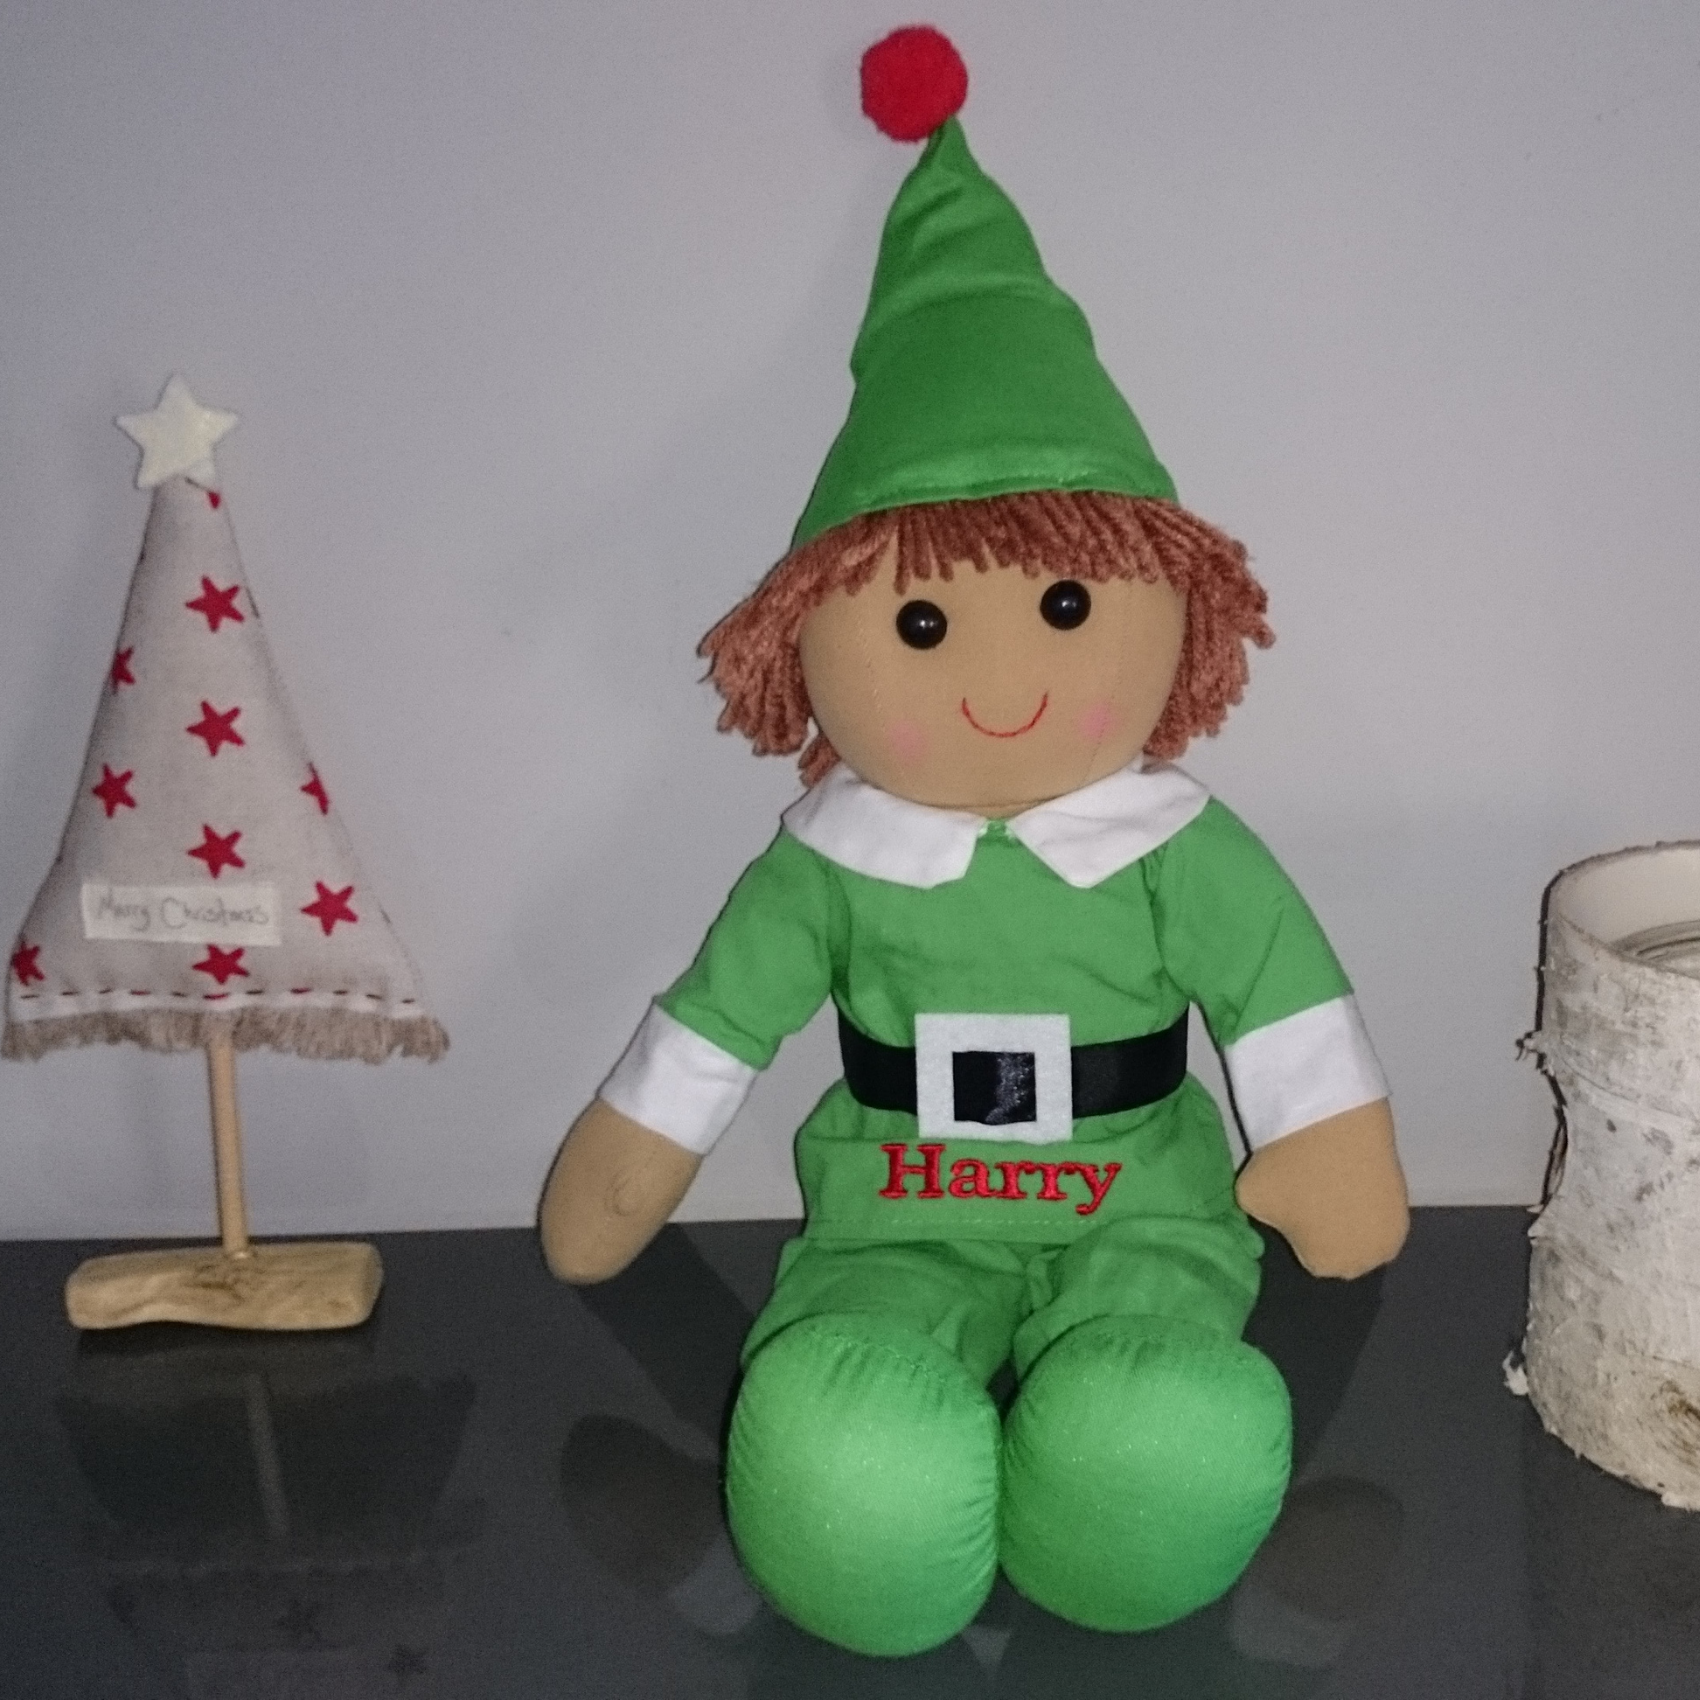 Personalised friendly Christmas elf soft toy wearing a green suit and green pointed hat with a red bauble. The green suit on the elf can be personalised with a name of your choice. The elf measures approximately 40 cm tall.